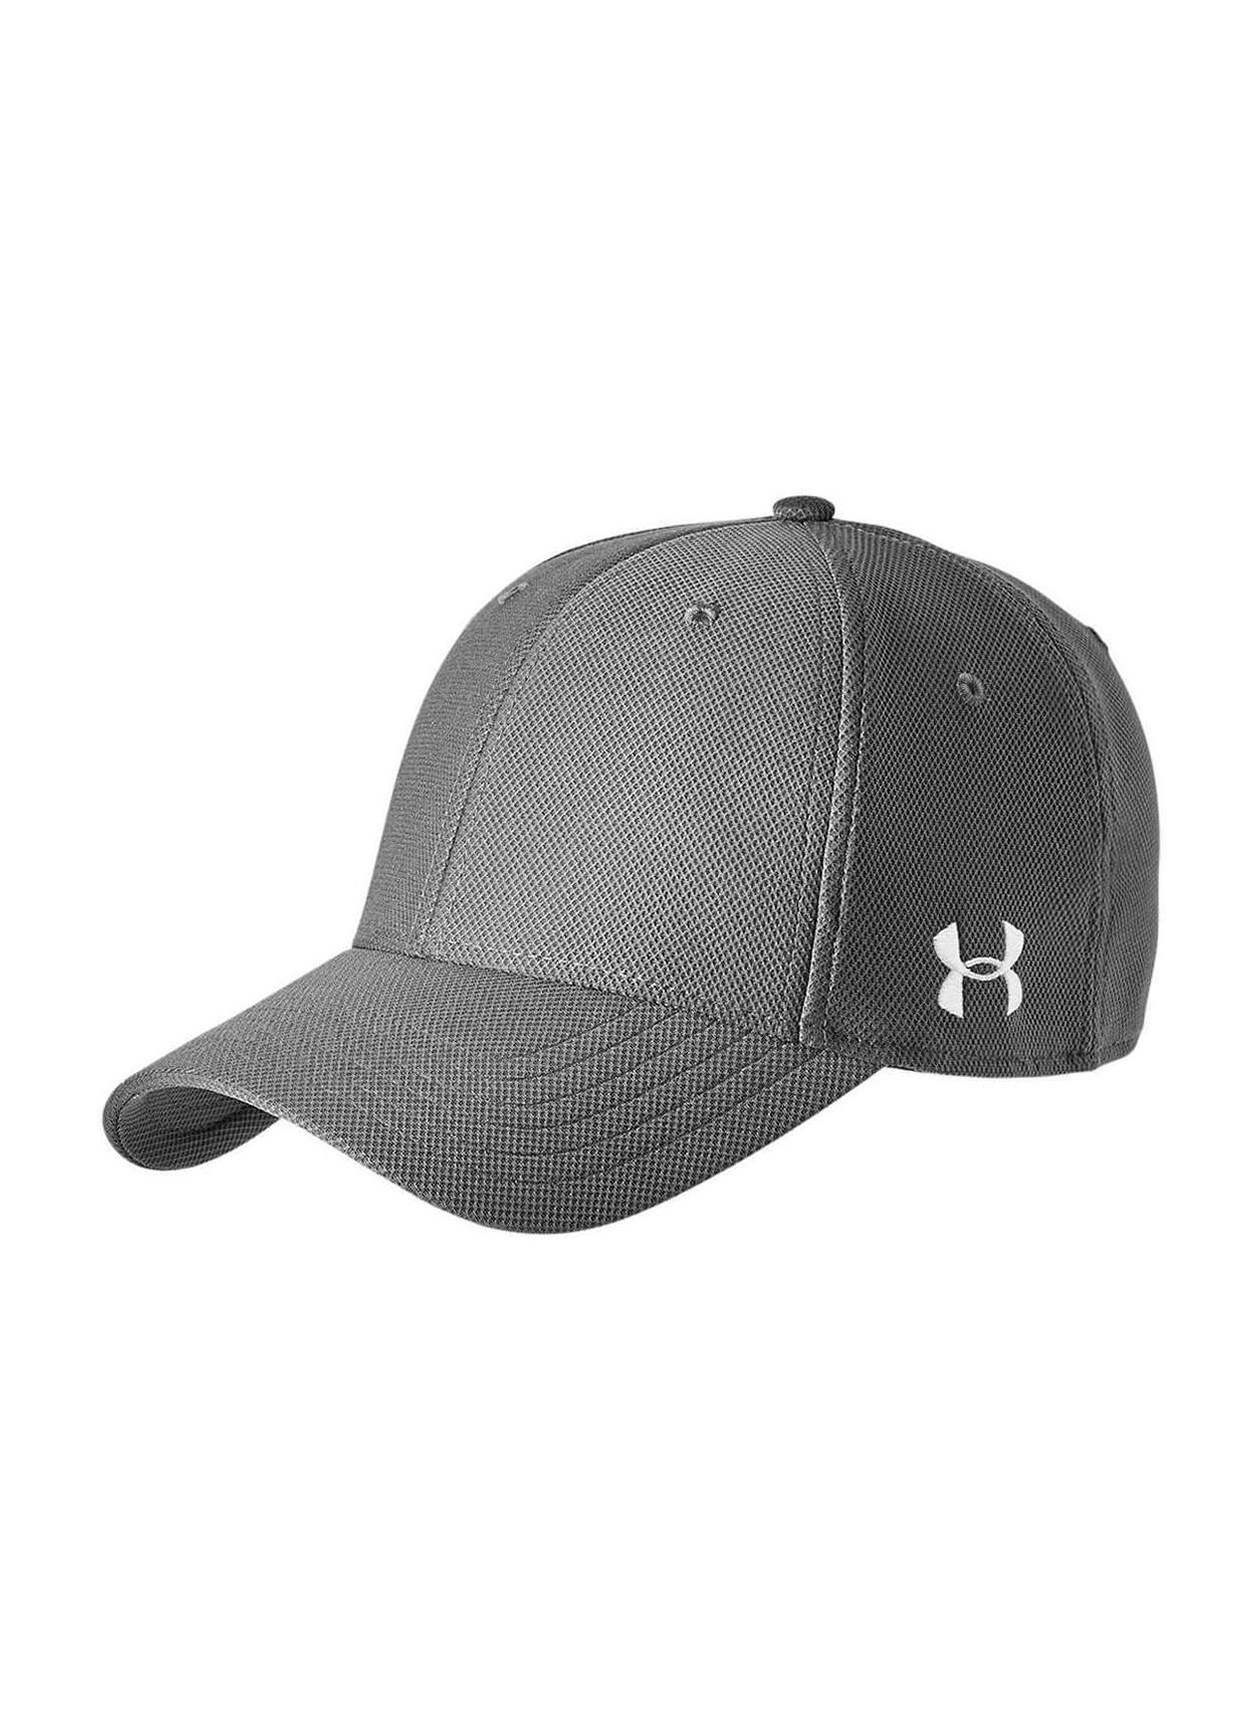 Graphite Under Armour Blitzing Curved Hat | Under Armour | Baseball Caps